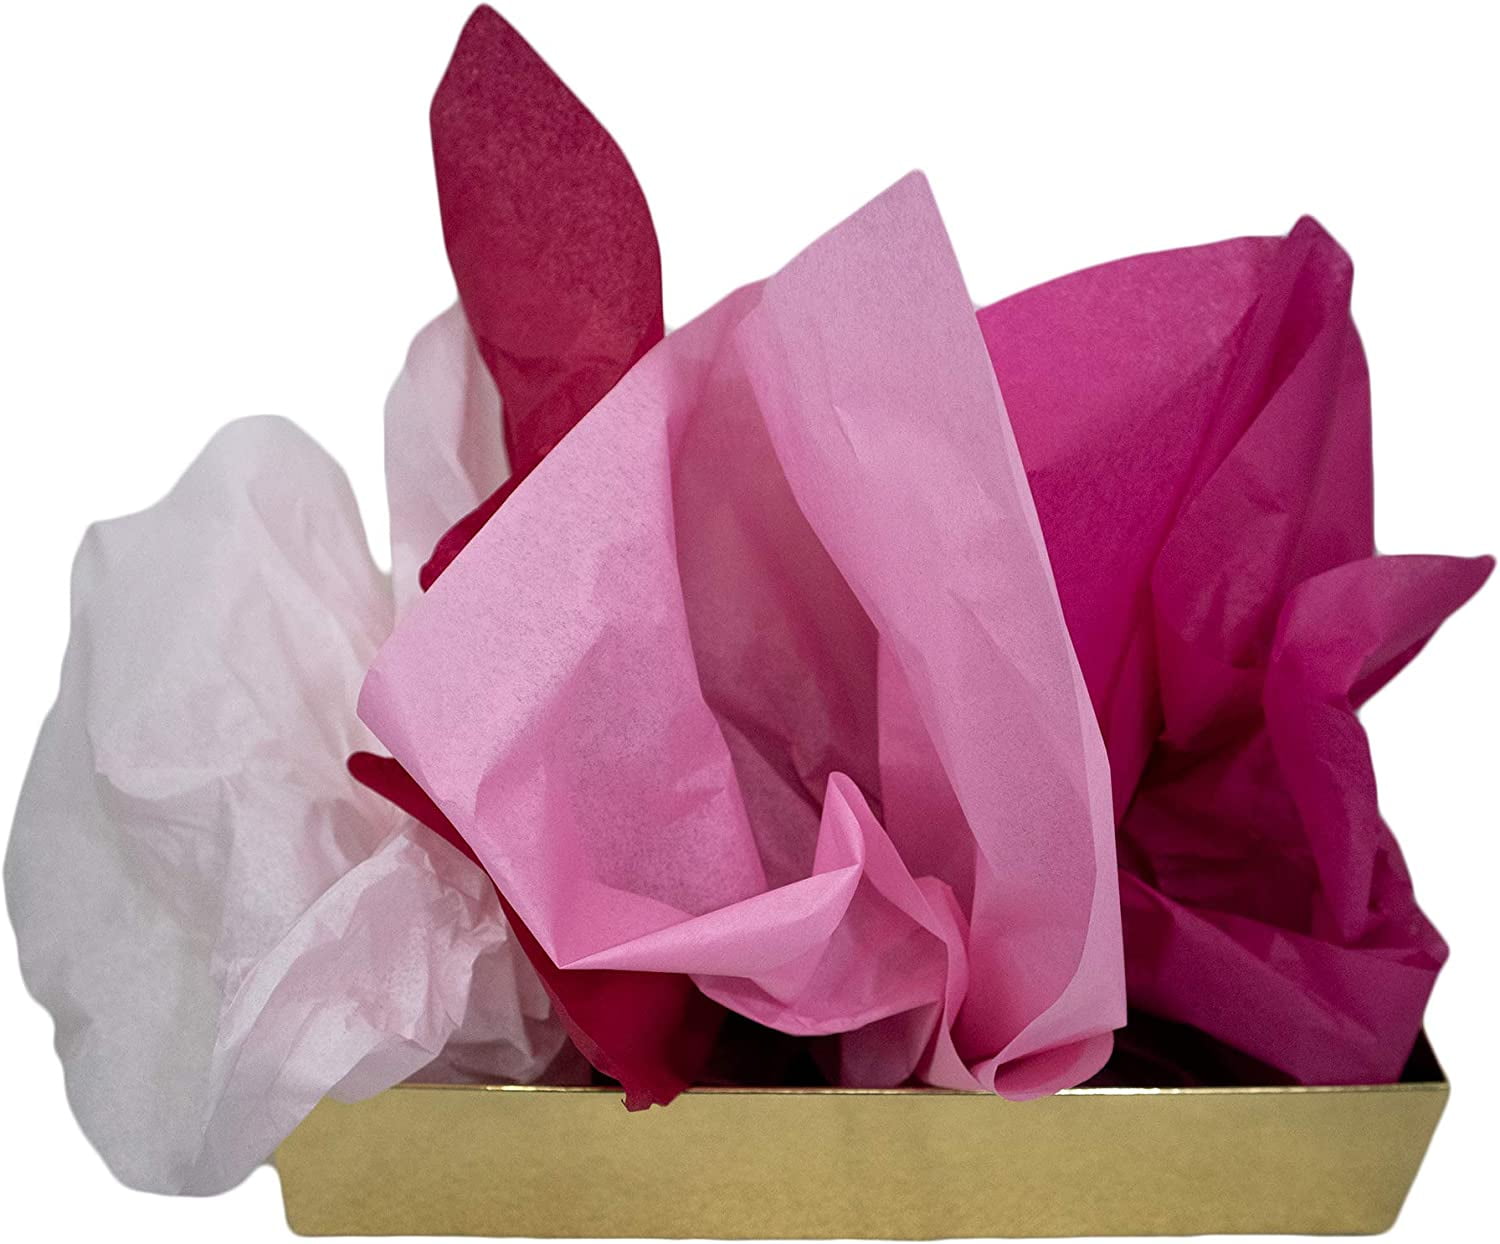 The Packaging Source  Light Pink Tissue Paper